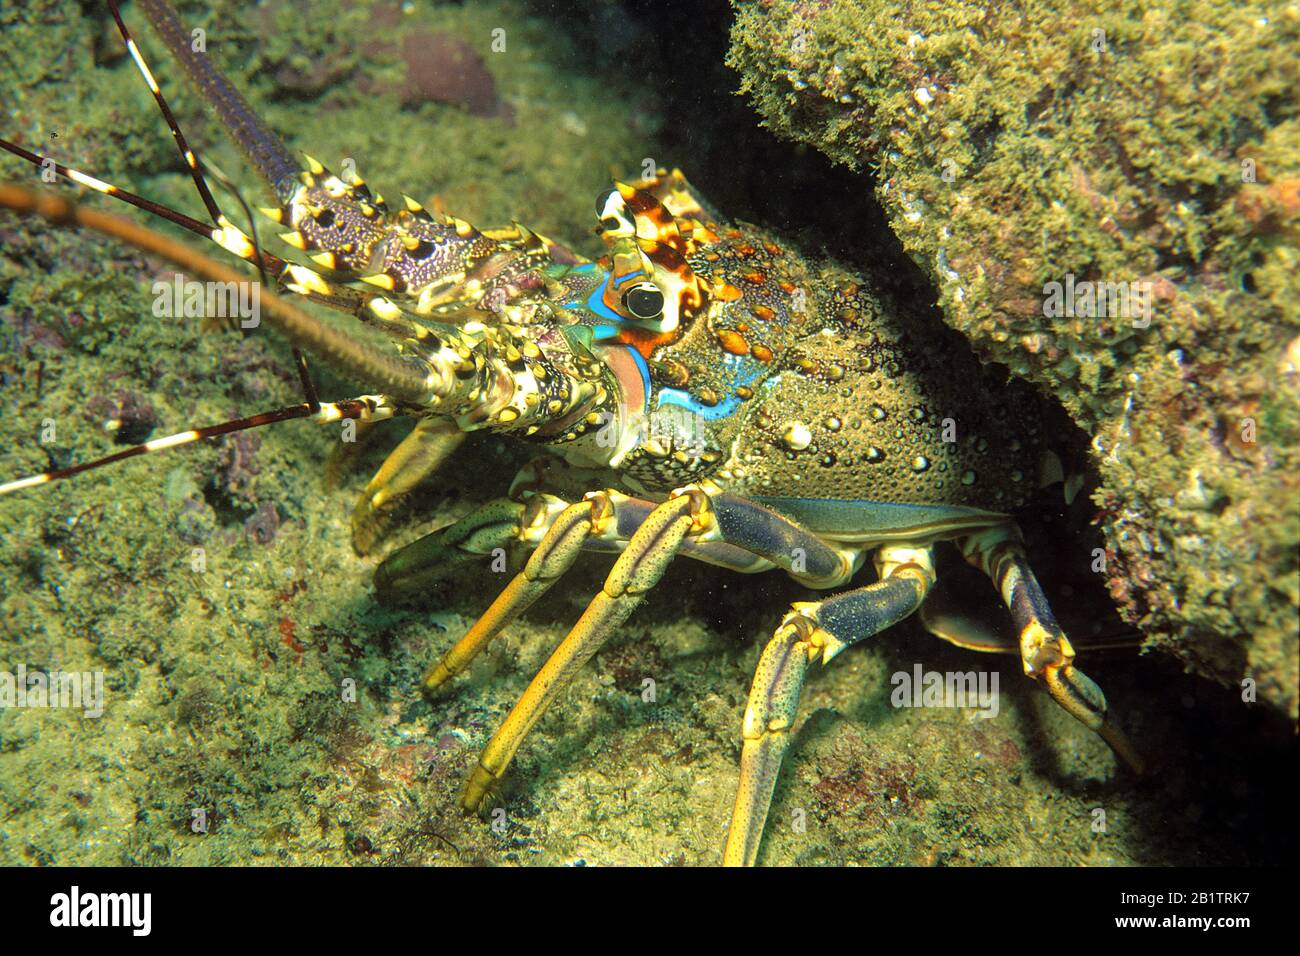 Scalloped spiny lobster (Panulirus homarus) hiding under a coral, Muscat, Oman Stock Photo